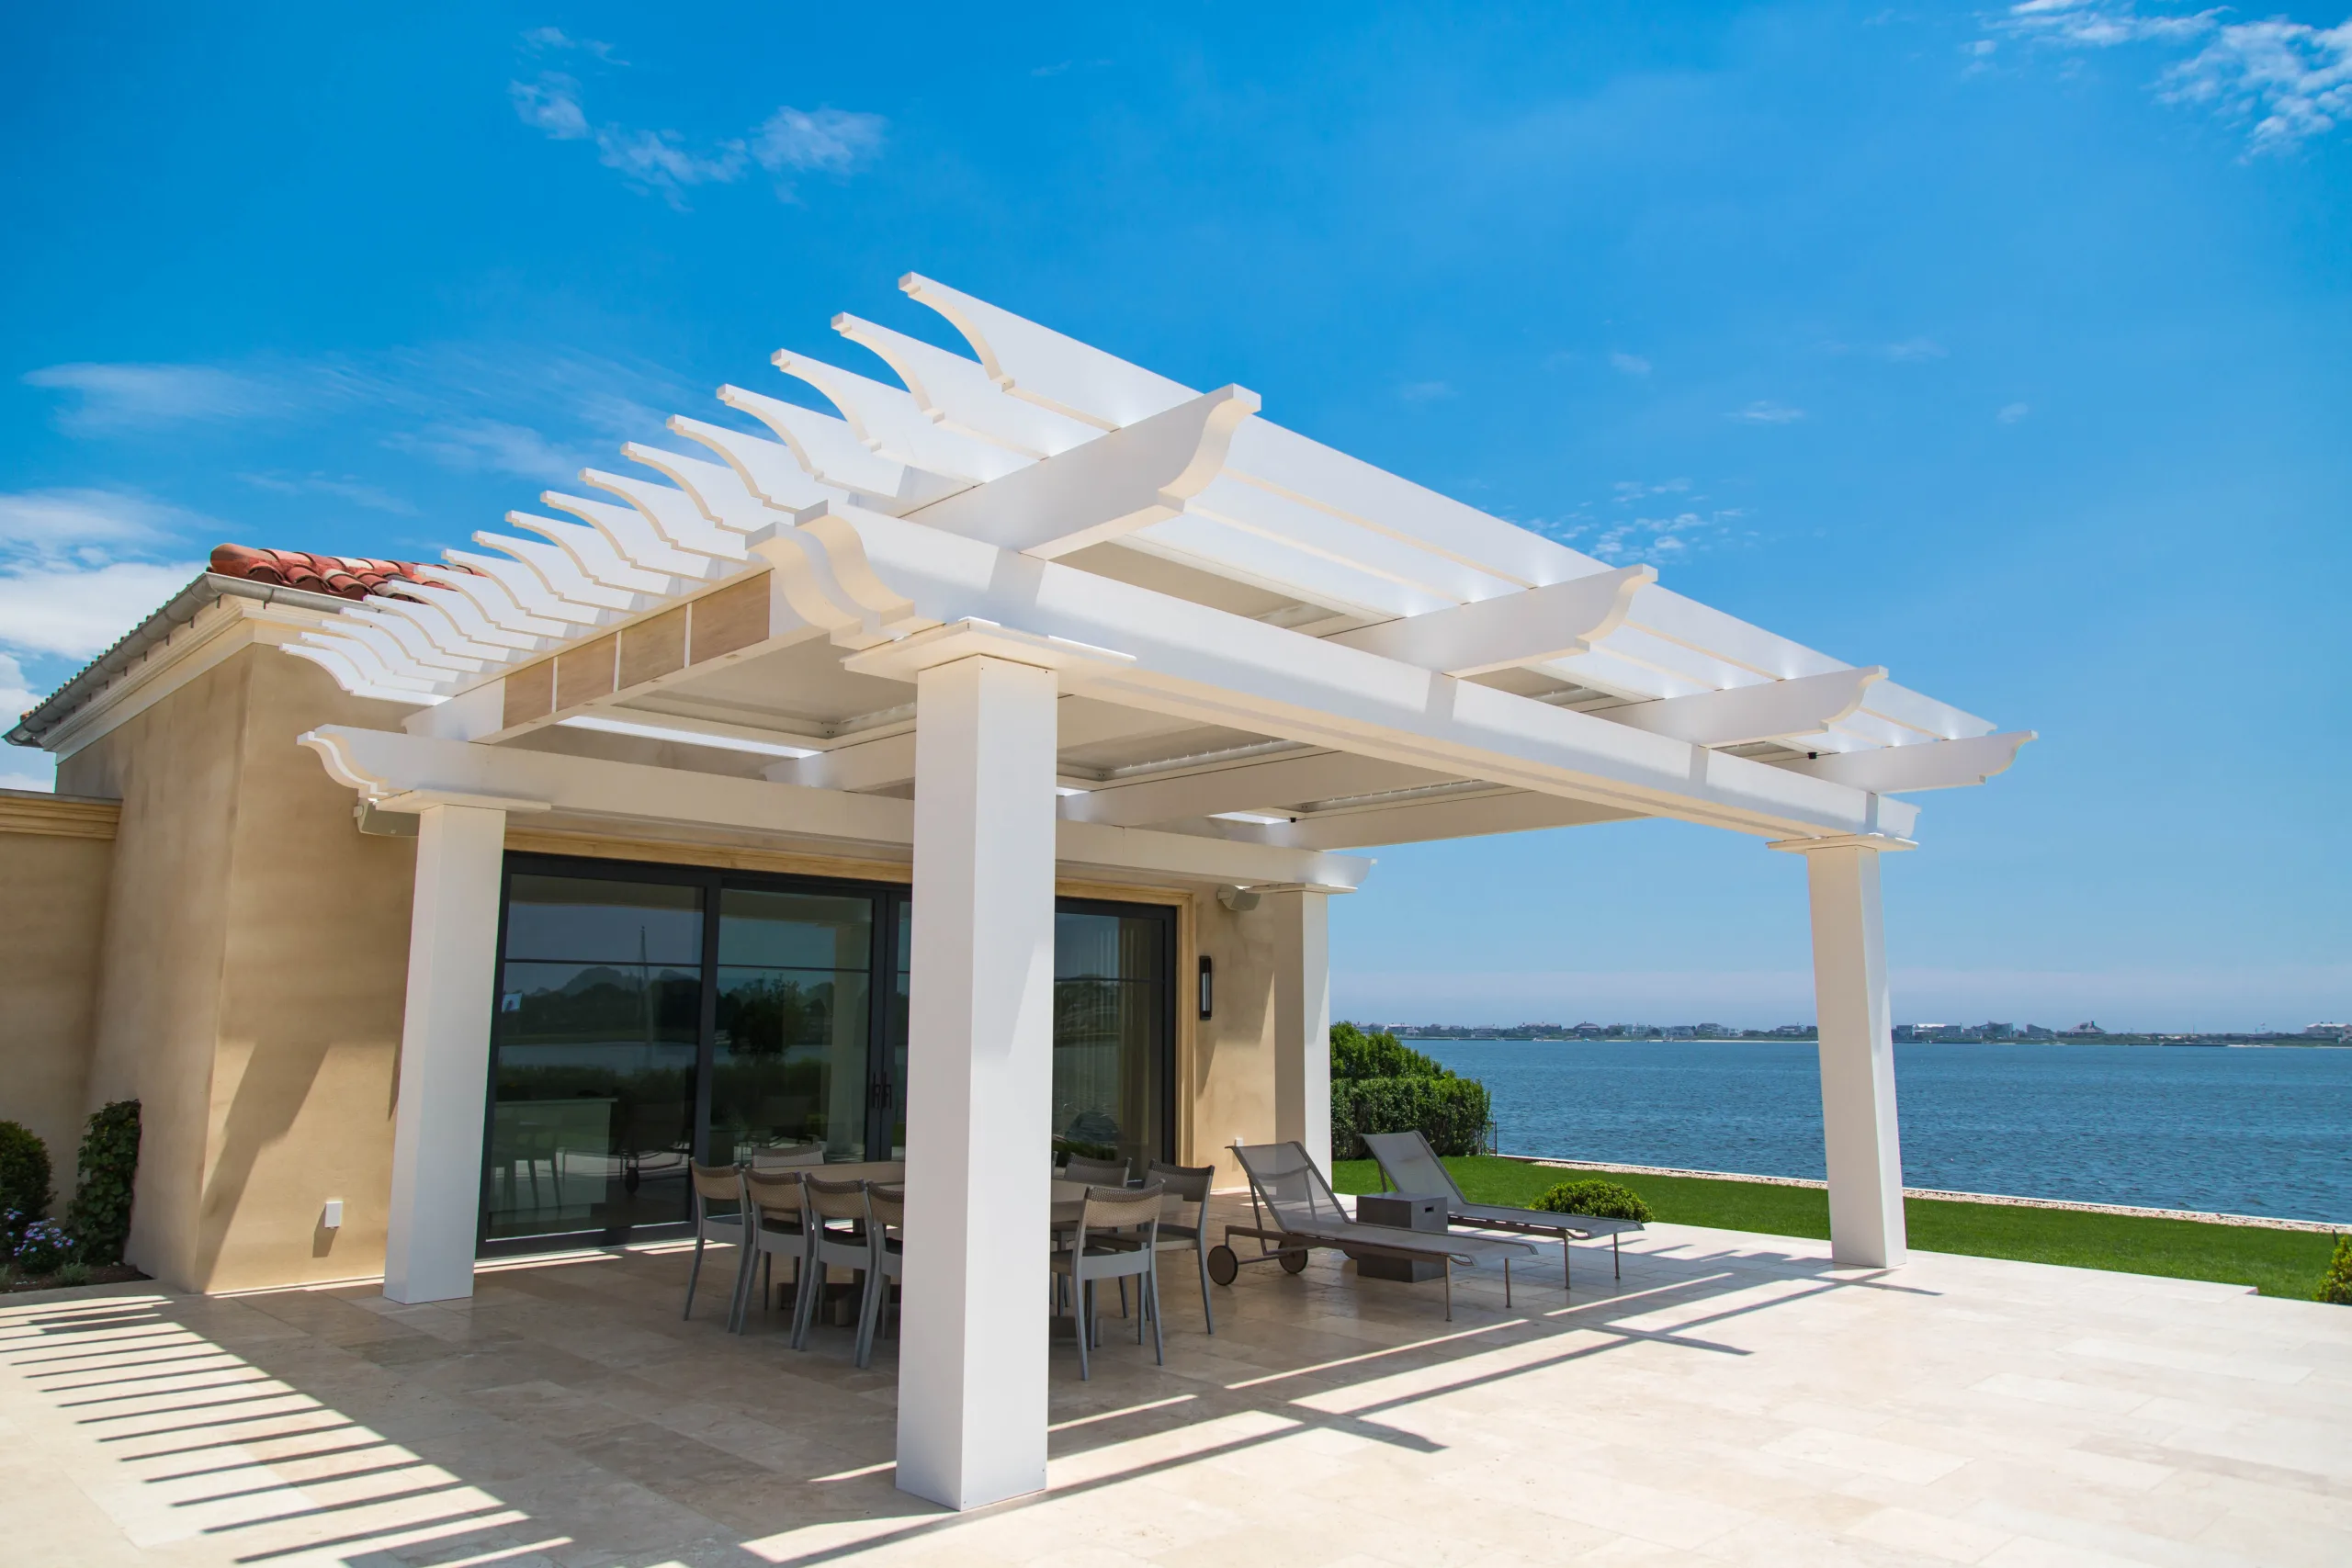 Cellular PVC Pergola on back patio overlooking the water